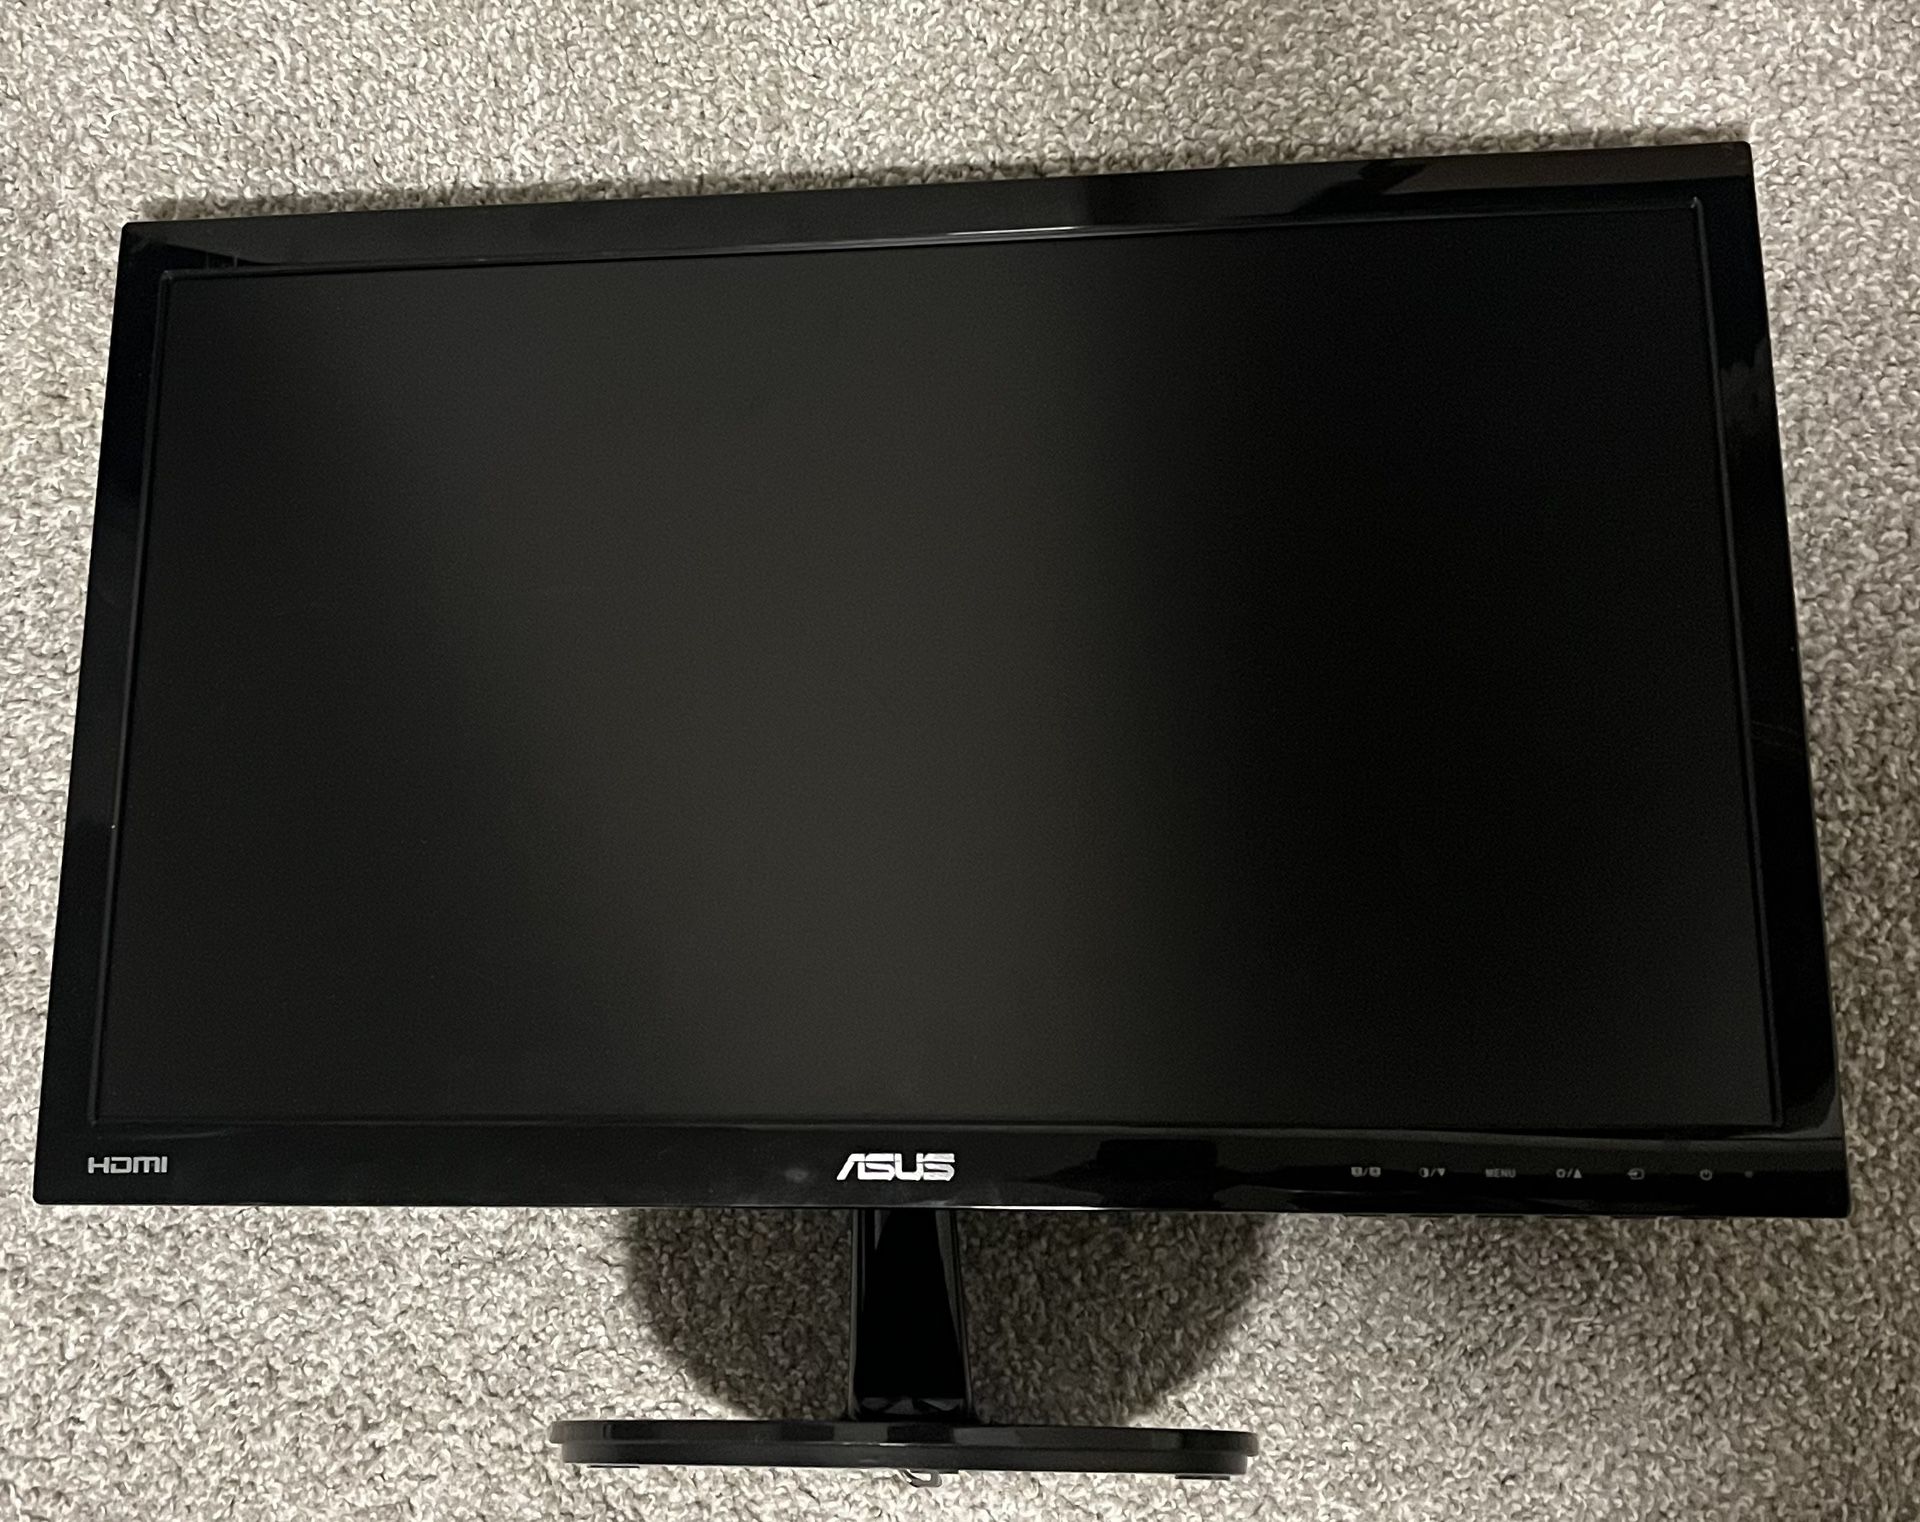 Asus Vs228-hp Monitor - Comes With New Keyboard 